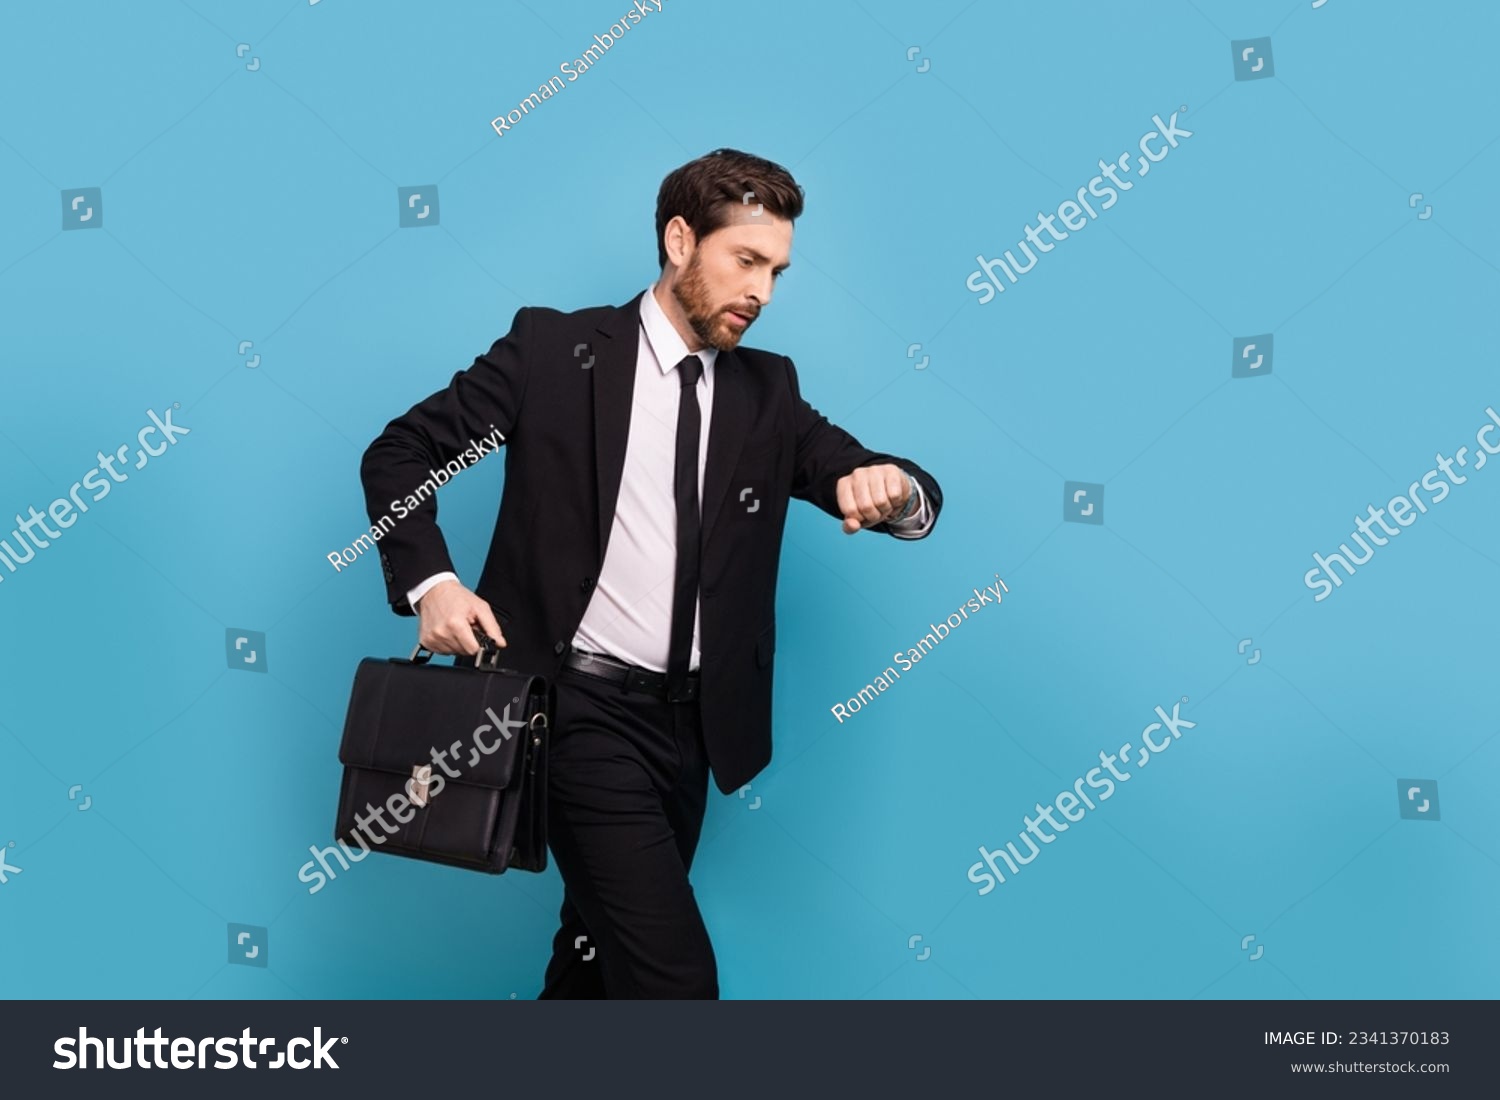 Employer executive director photo of run young politician leader group hurry hold suit bag check watches isolated on blue color background #2341370183